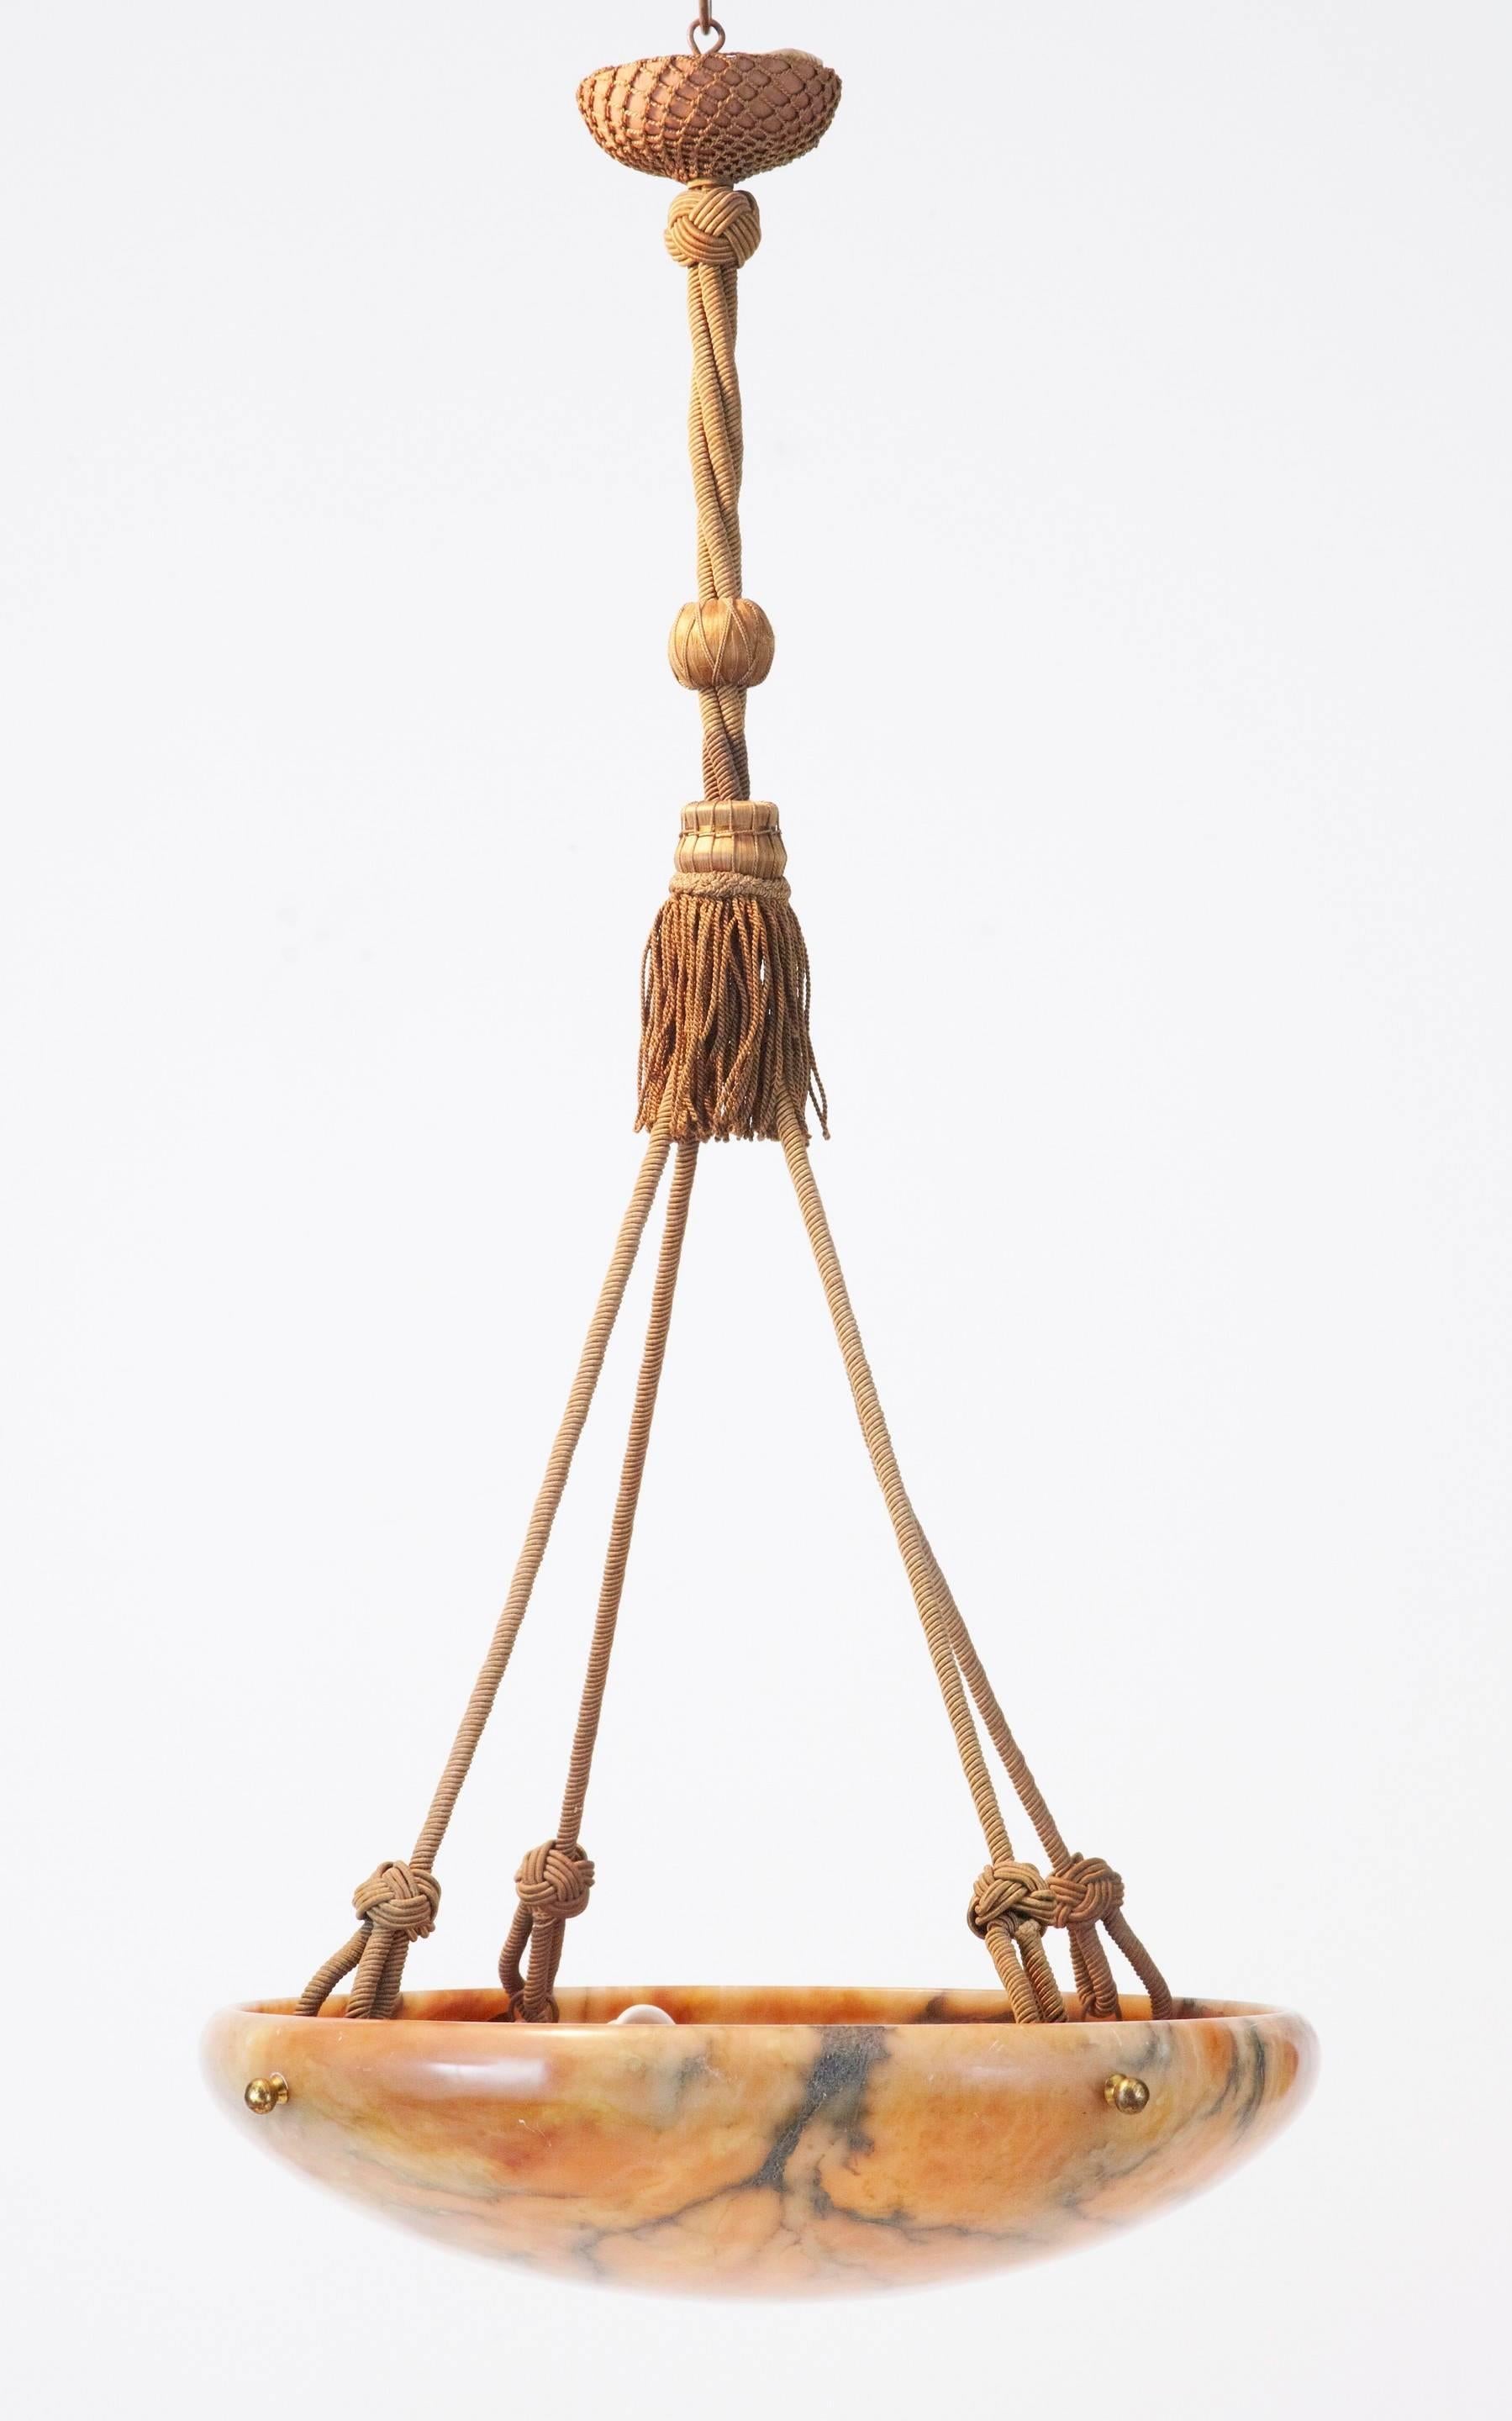 Fine alabaster hanging ceiling light, circa 1920.
Peach colored stone with grey veining.
Four light fittings, which form the anchor for the four rope supports, leading up to tassels and the strung ceiling rose.
Untested, we recommend that this